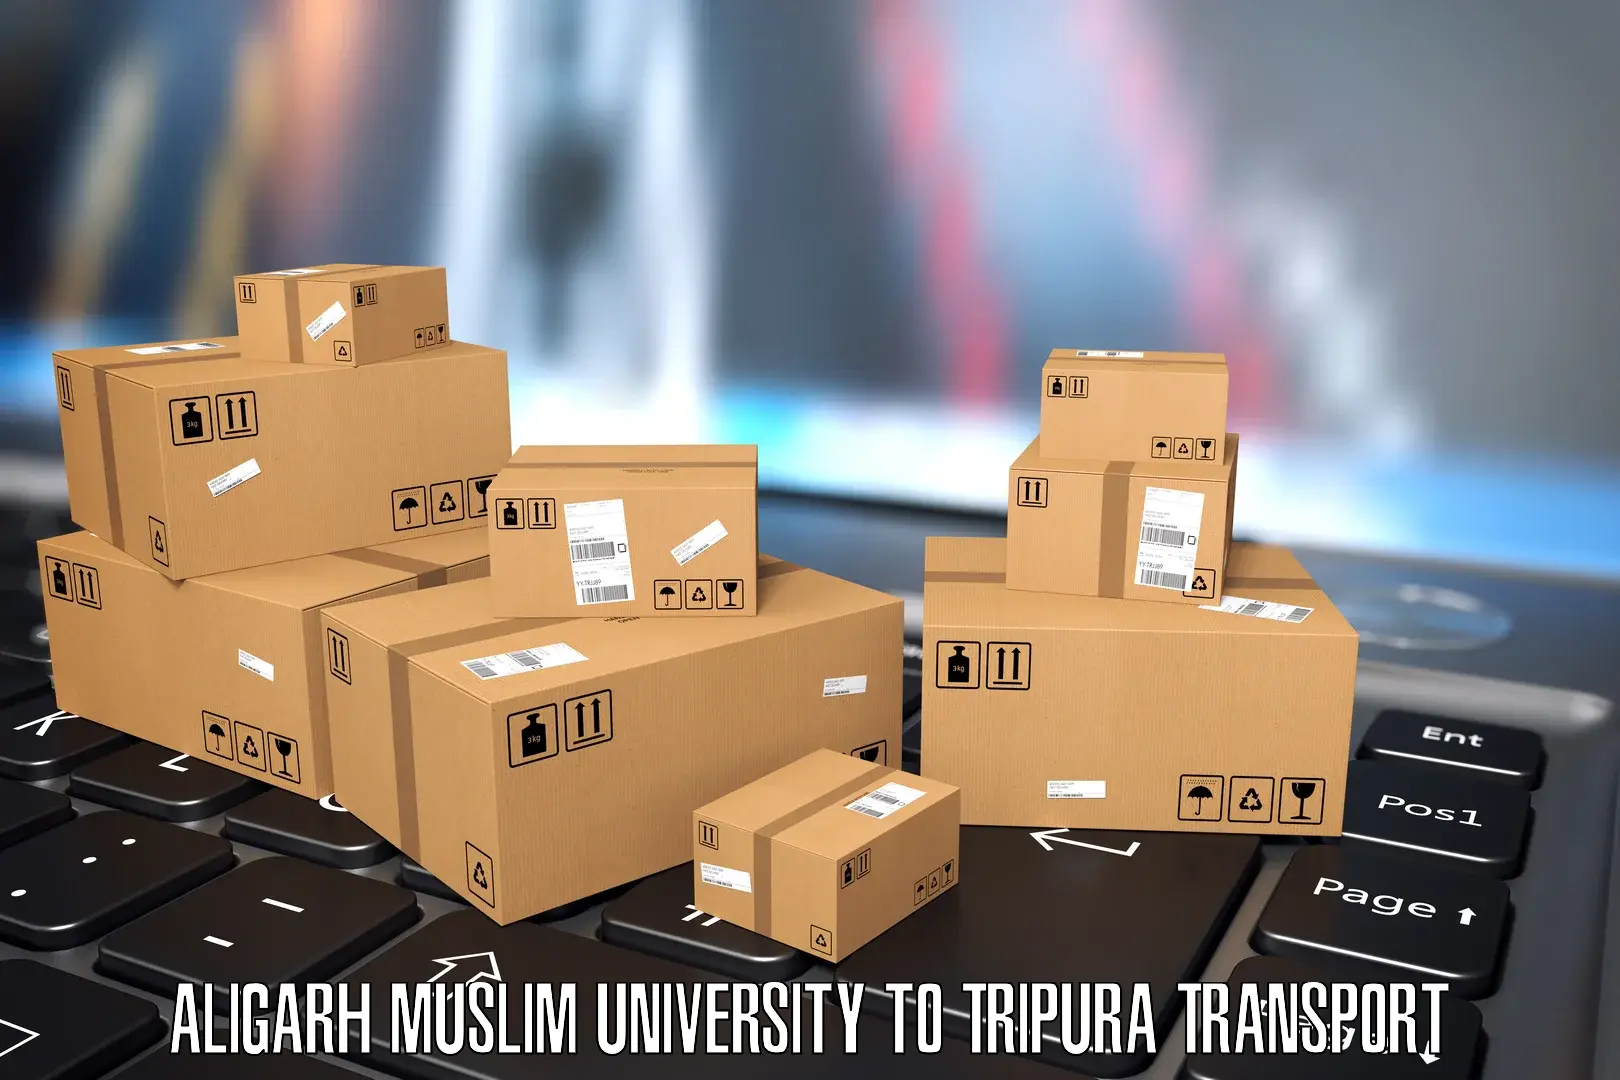 Package delivery services Aligarh Muslim University to Aambasa